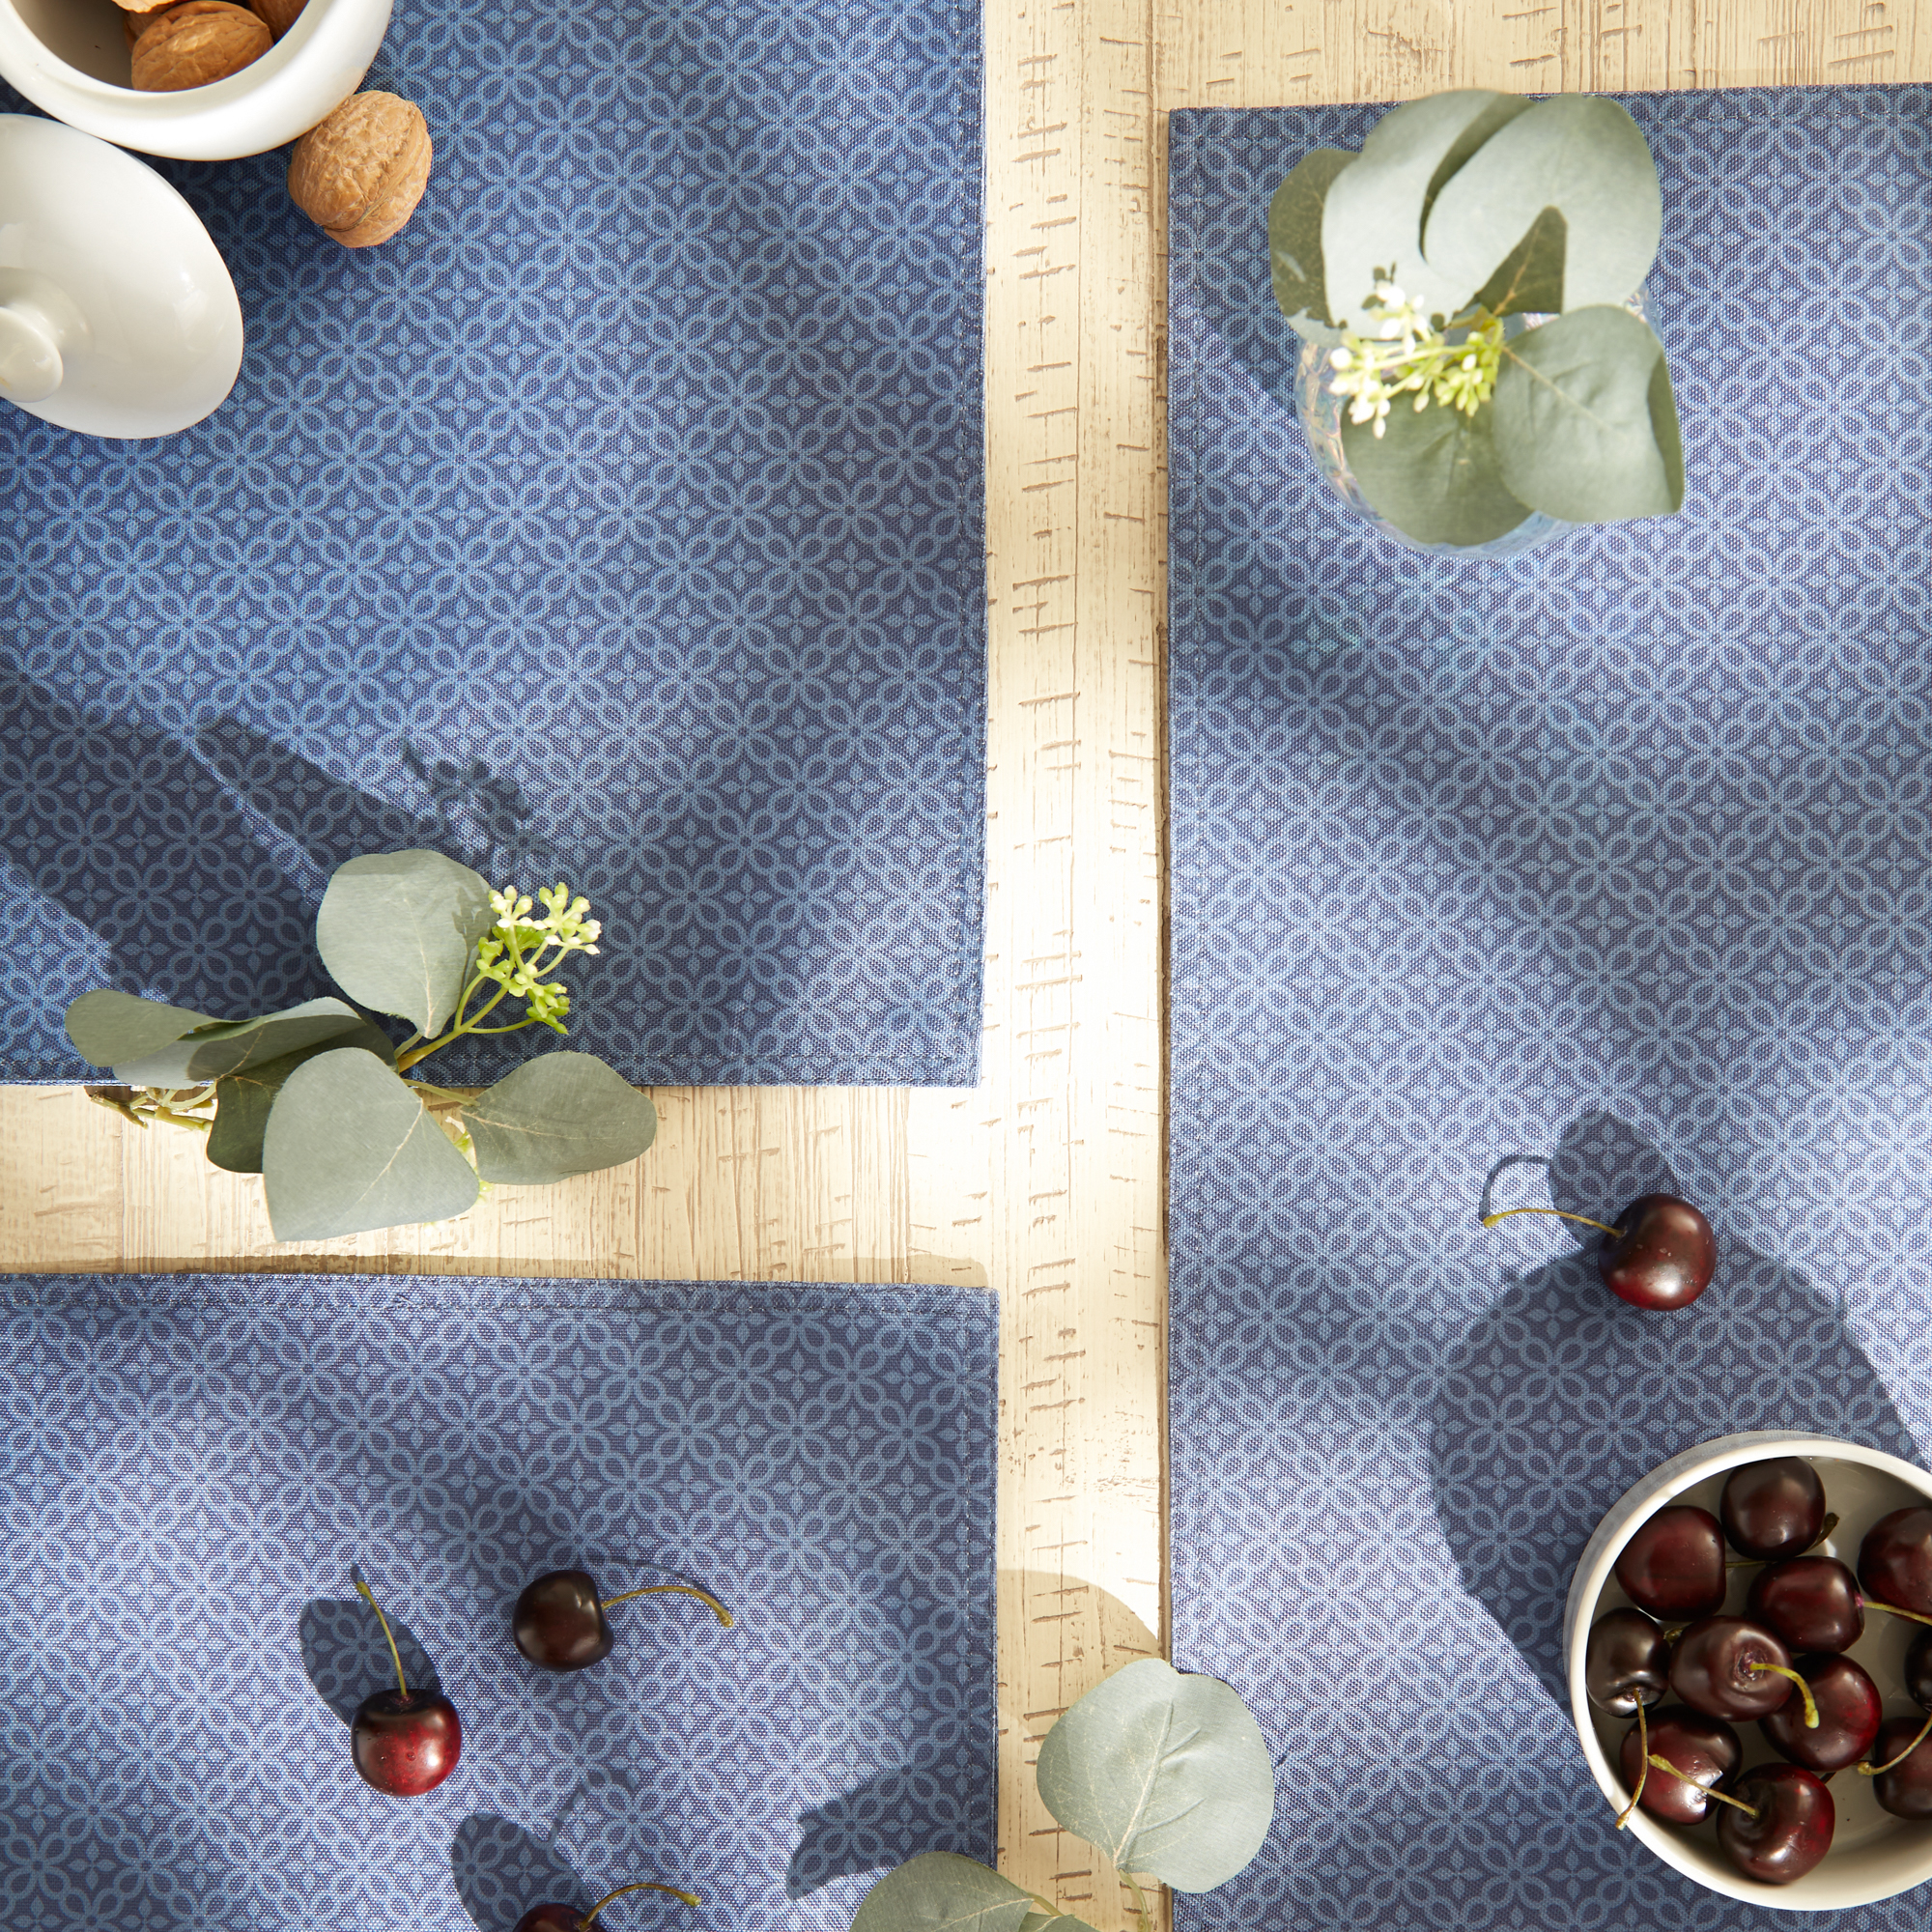 DII French Blue Tonal Lattice Print Outdoor  Placemat (Set of 6)